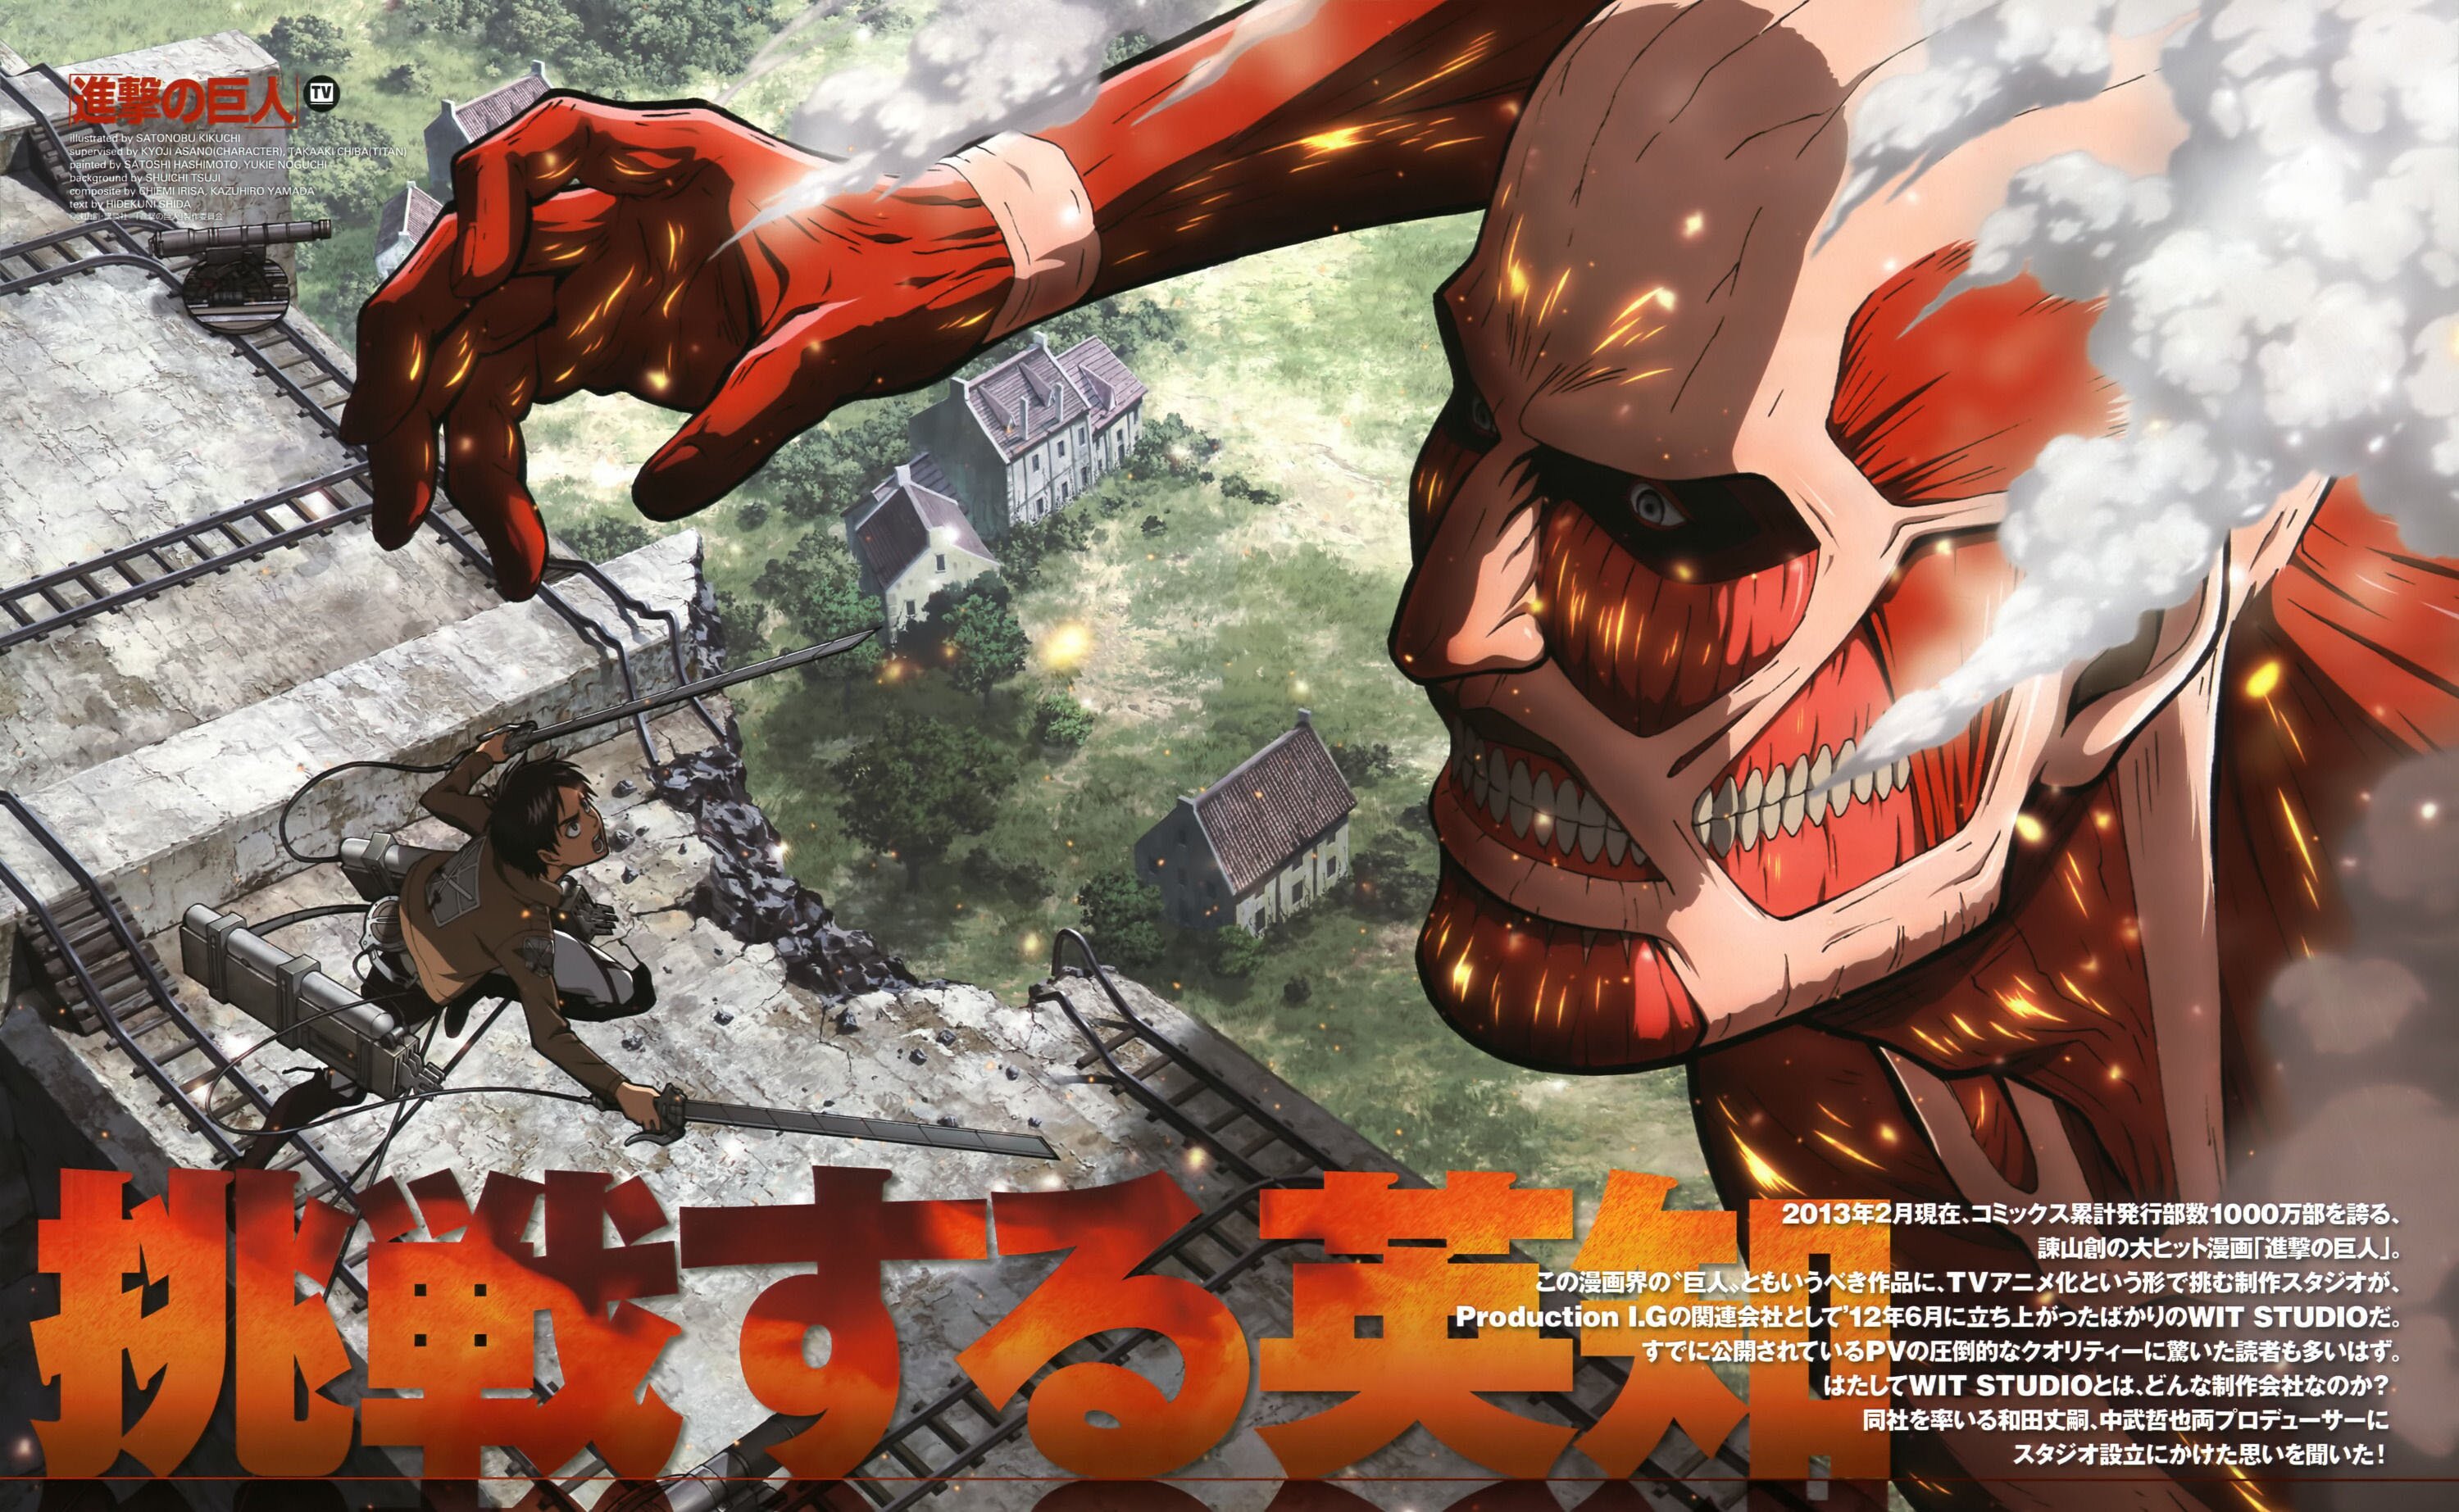 Attack on Titan, Official Posters,exquisite